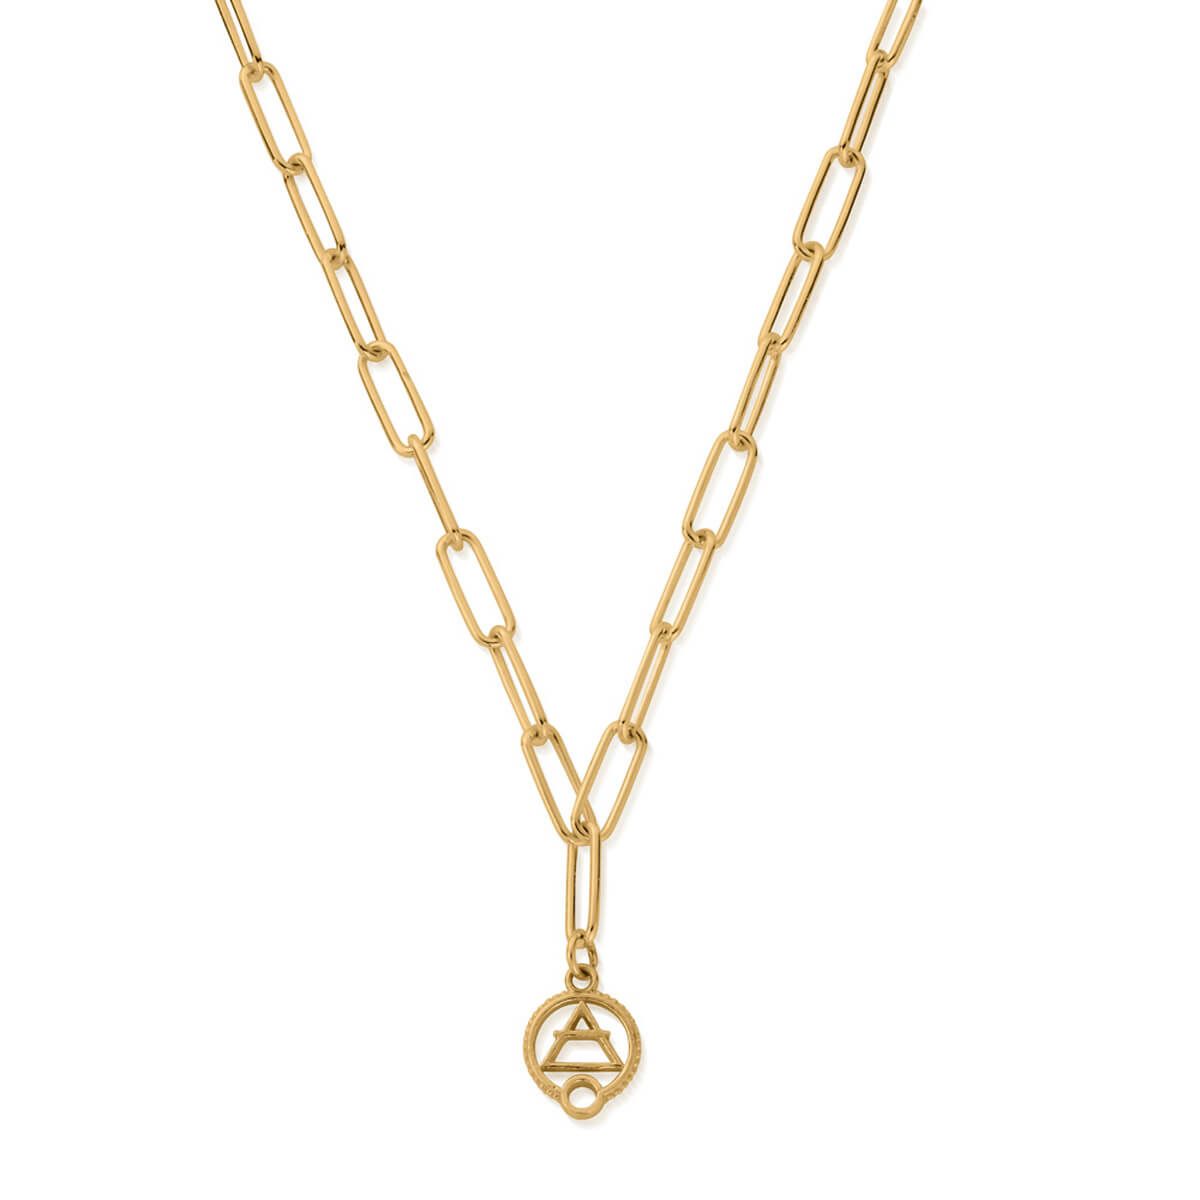 Chlobo Link Chain Necklace - Air